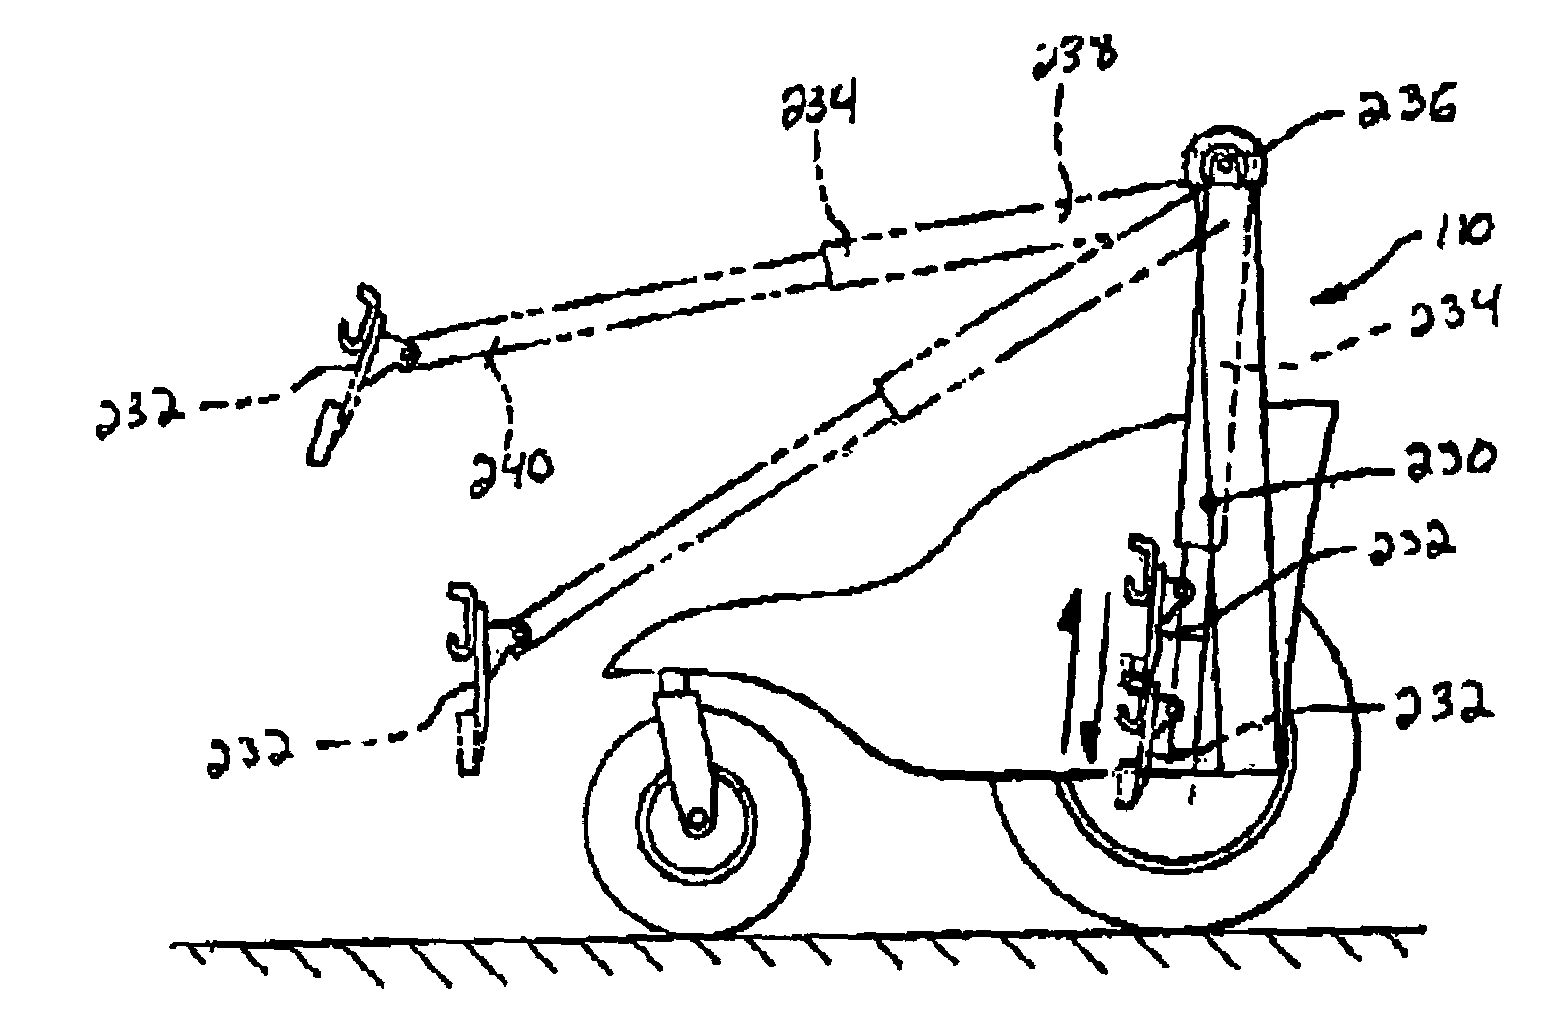 Lift mechanism for a seating device